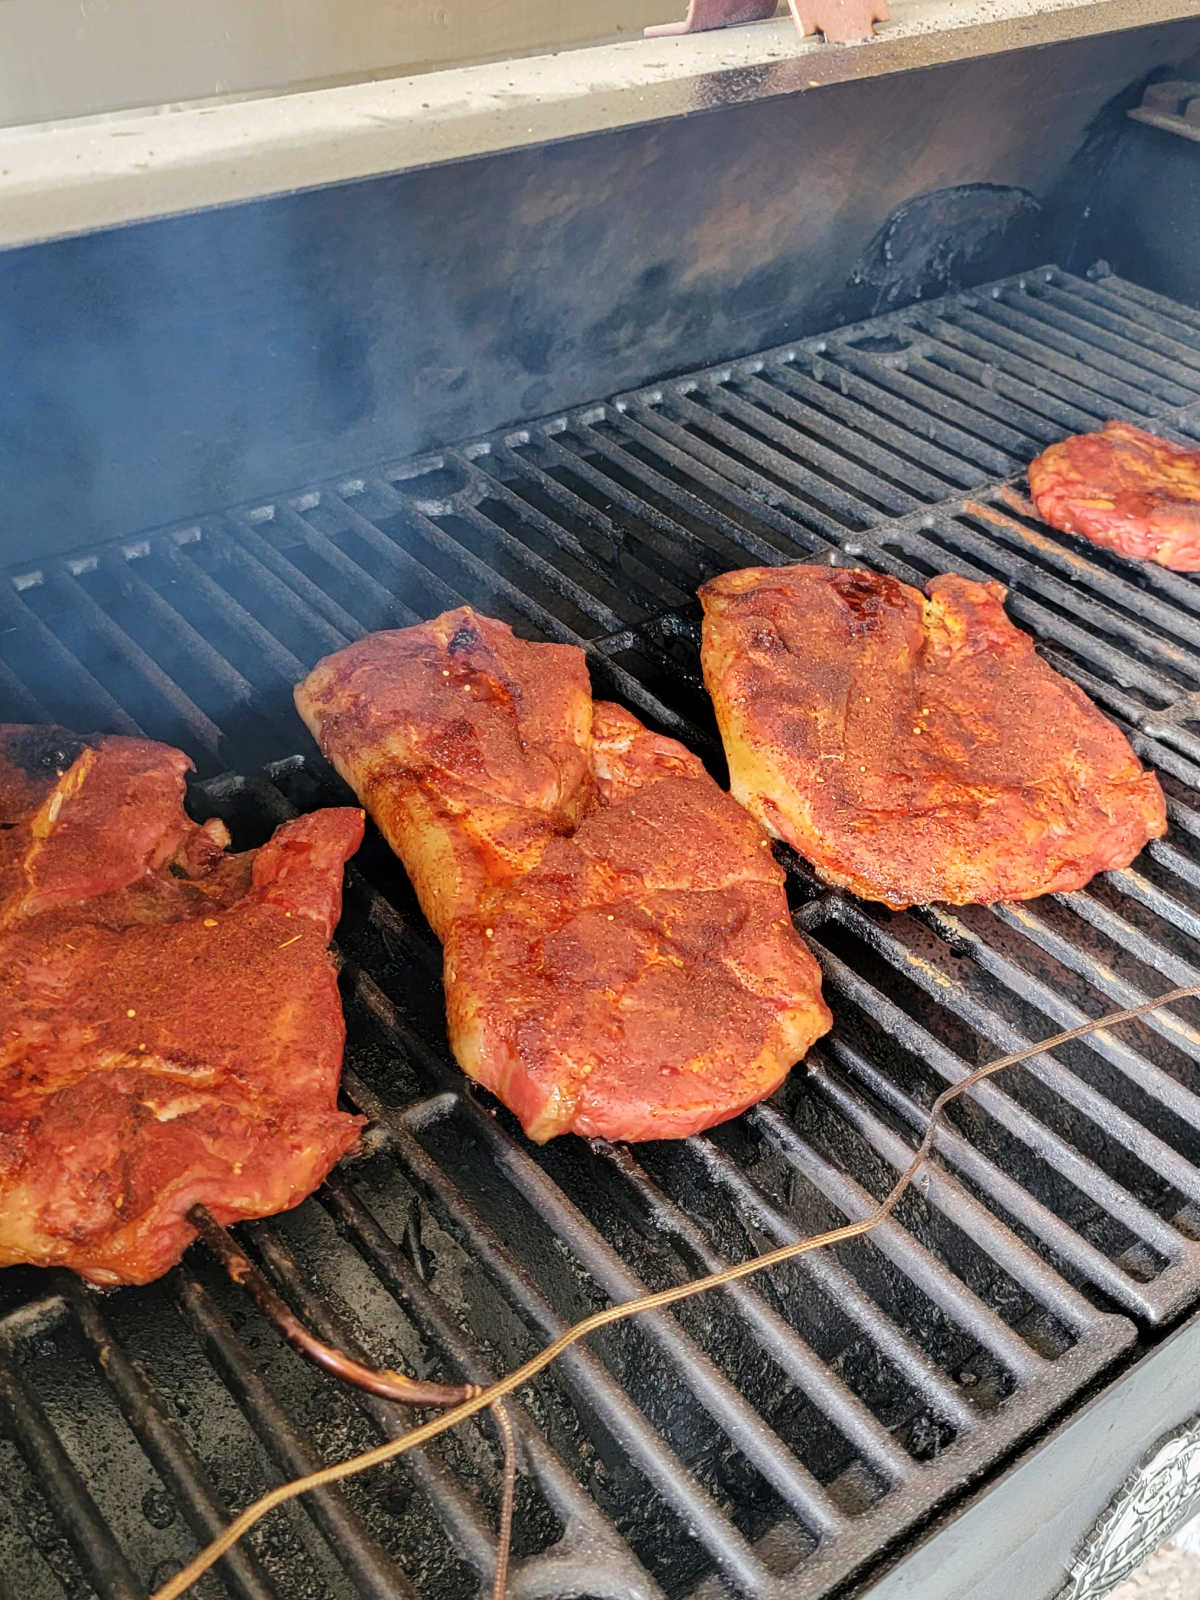 Smoked pork steaks with dry rub, they are partially cooked and ready for the sauce.